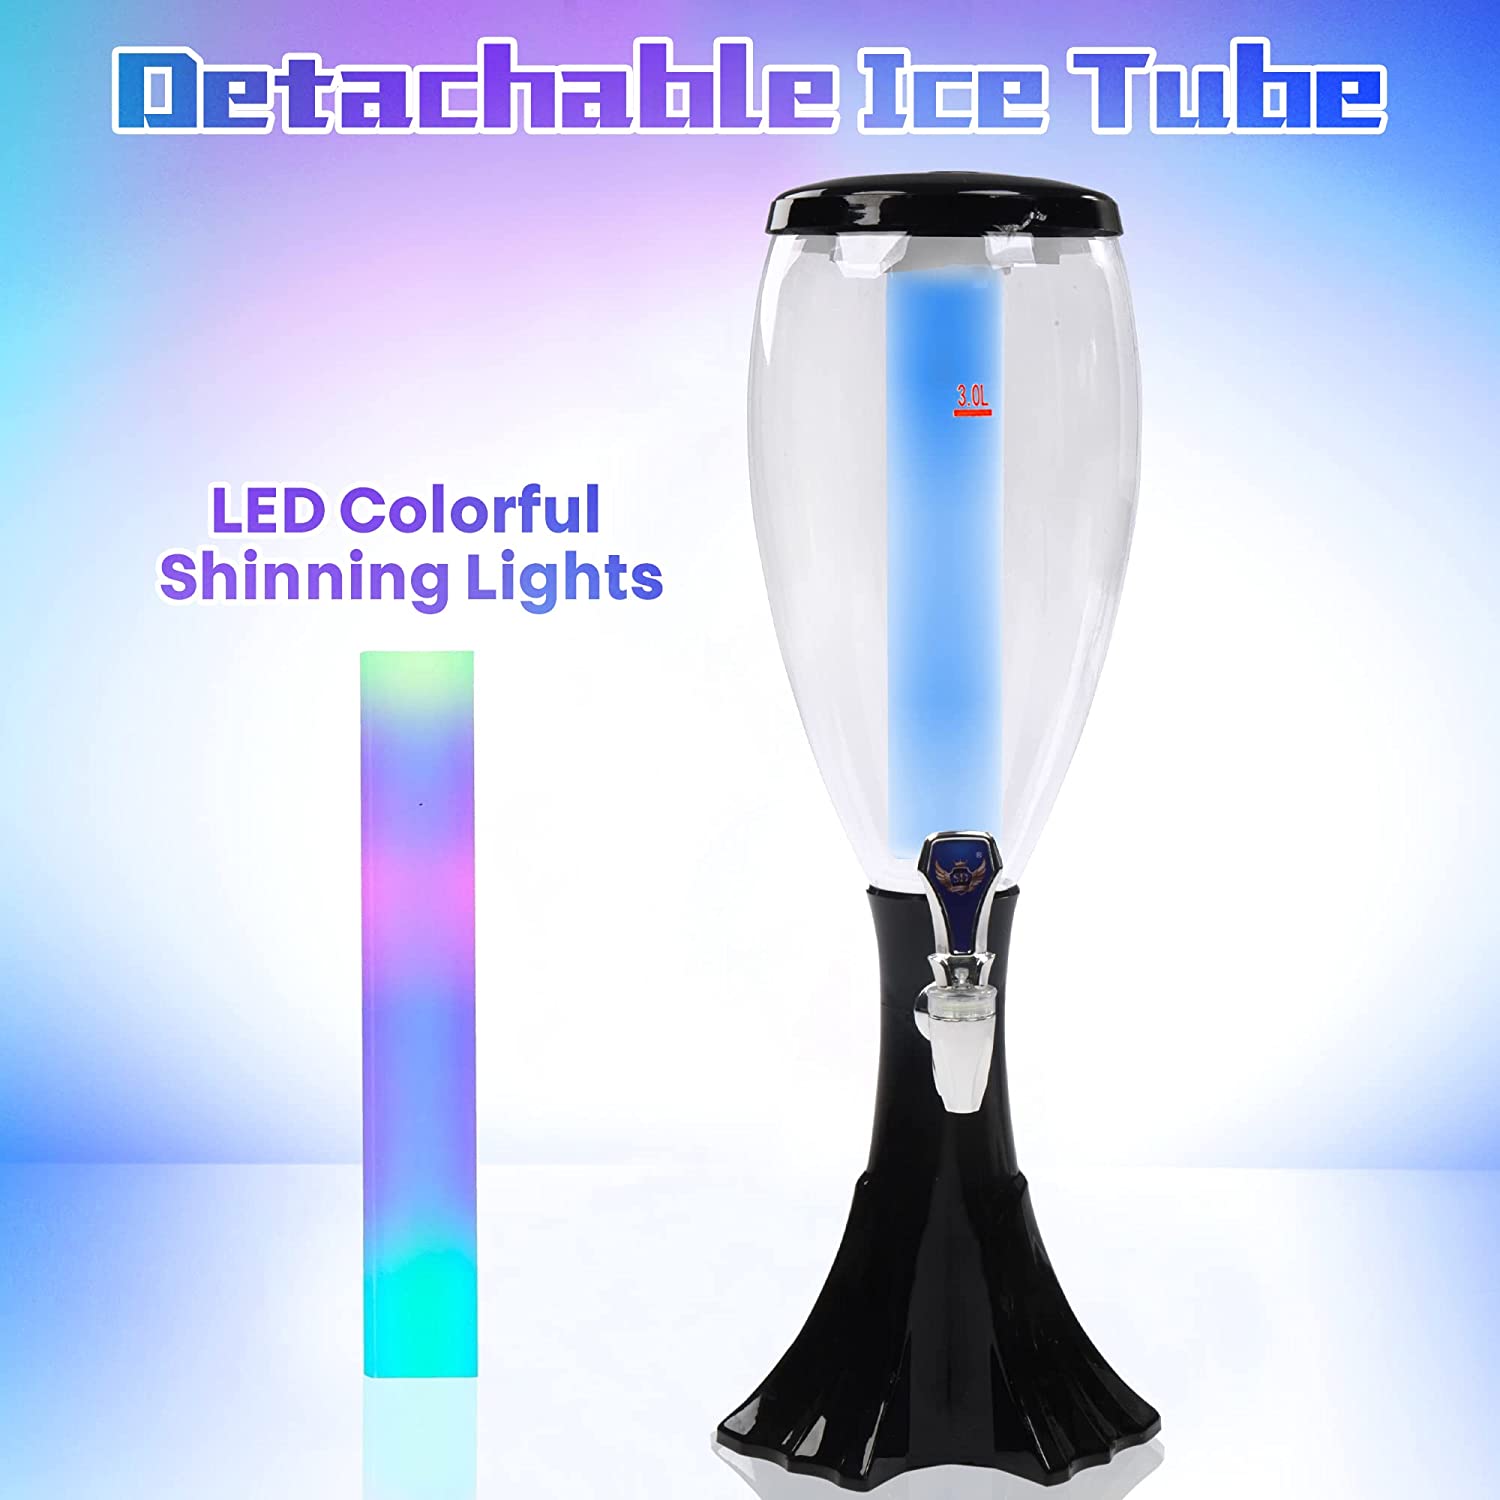 3L Draft Beer Tap Drink Beverage Dispenser Plastic w/ LED Lights & Ice Tube Keep Cold for Birthday Party Bar